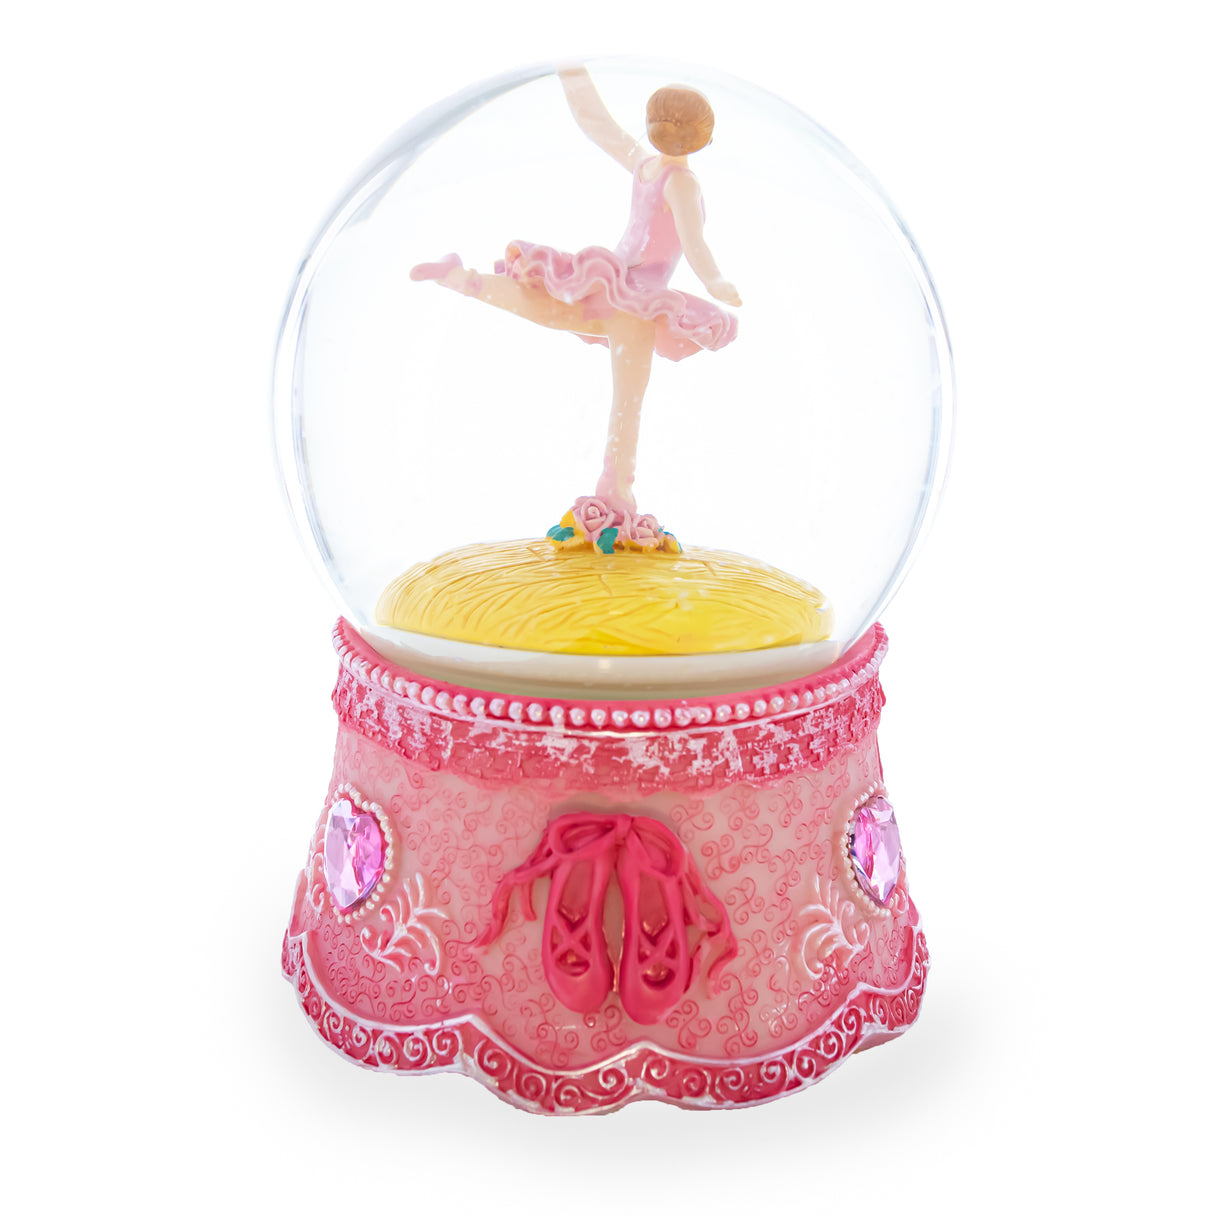 Graceful Pirouette: Pink Ballerina in Enchanting Spin - Musical Water Snow Globe ,dimensions in inches: 5.75 x 4 x 4